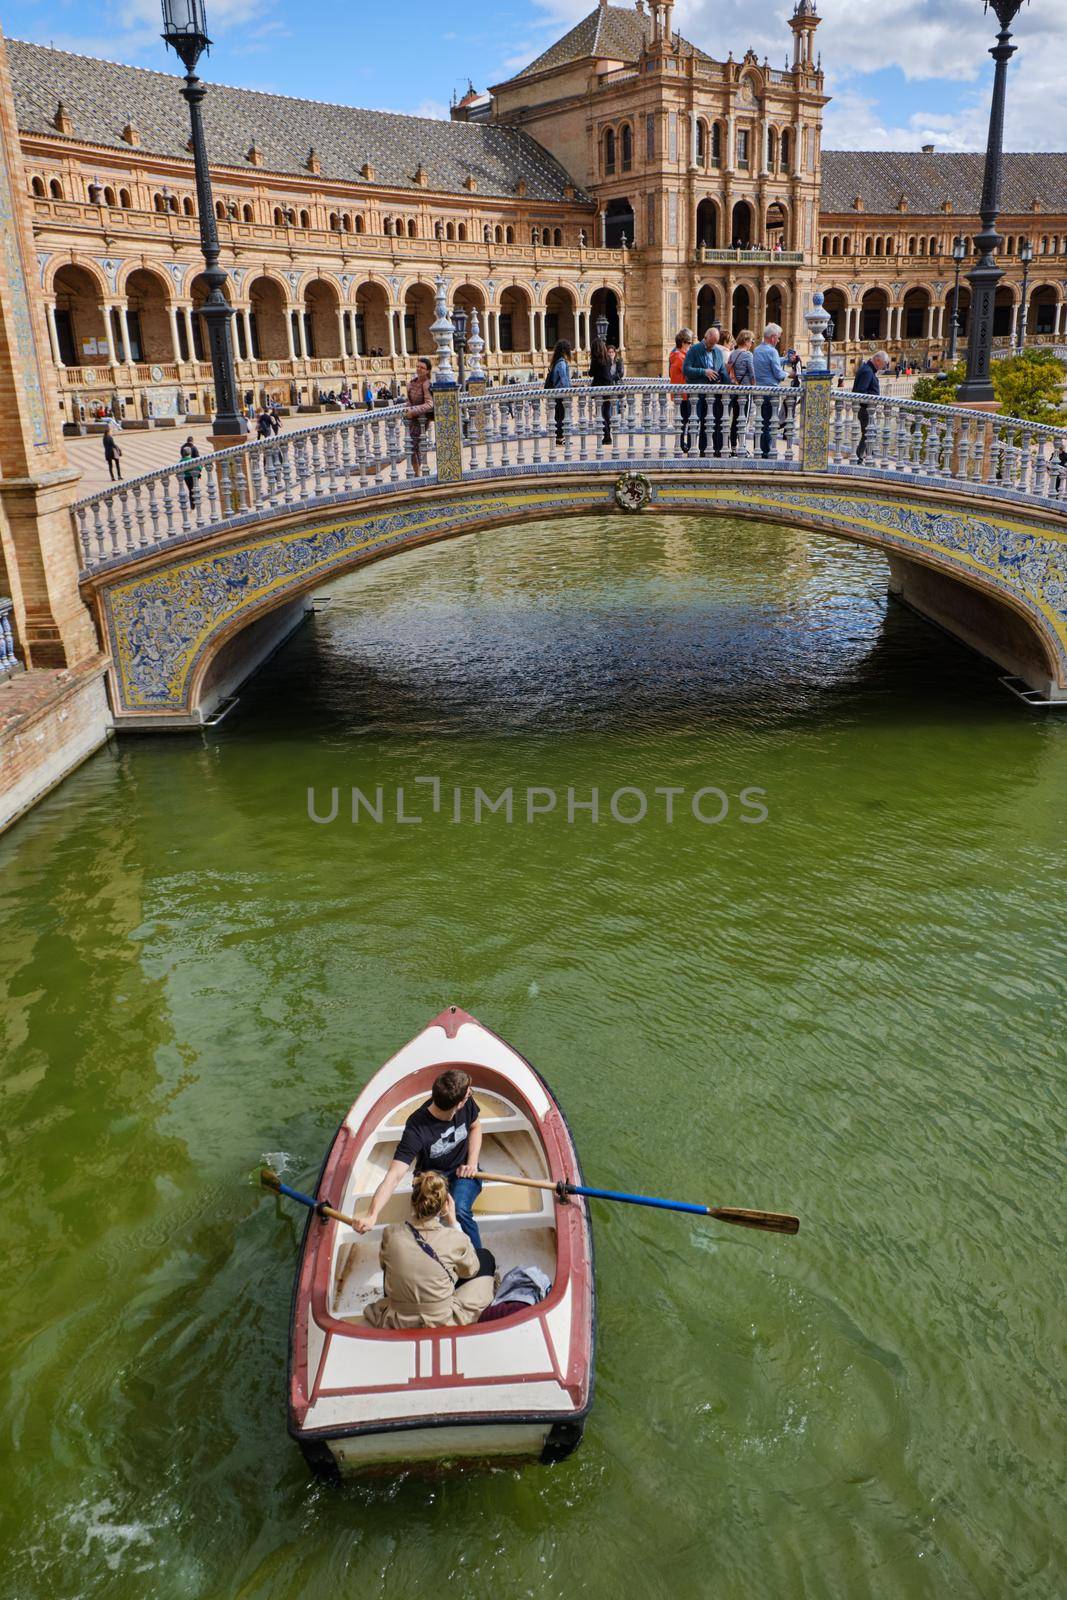 April 2019 - lovers on the little boat and bridge of Andalisia Seville's main square Plaza de Espana by Sandronize